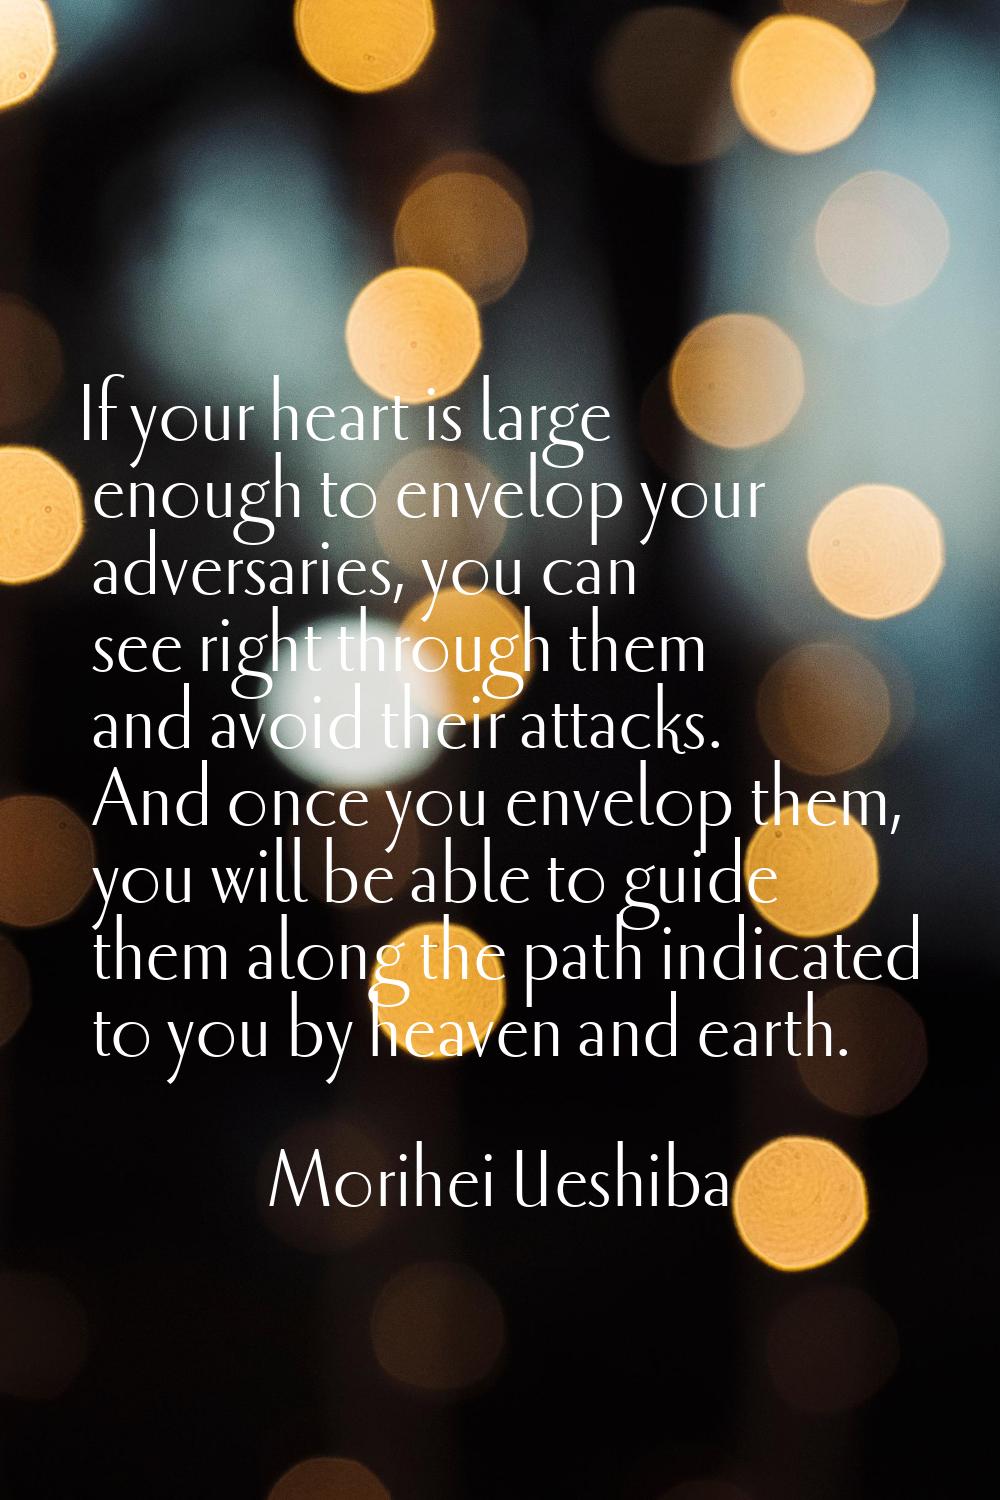 If your heart is large enough to envelop your adversaries, you can see right through them and avoid